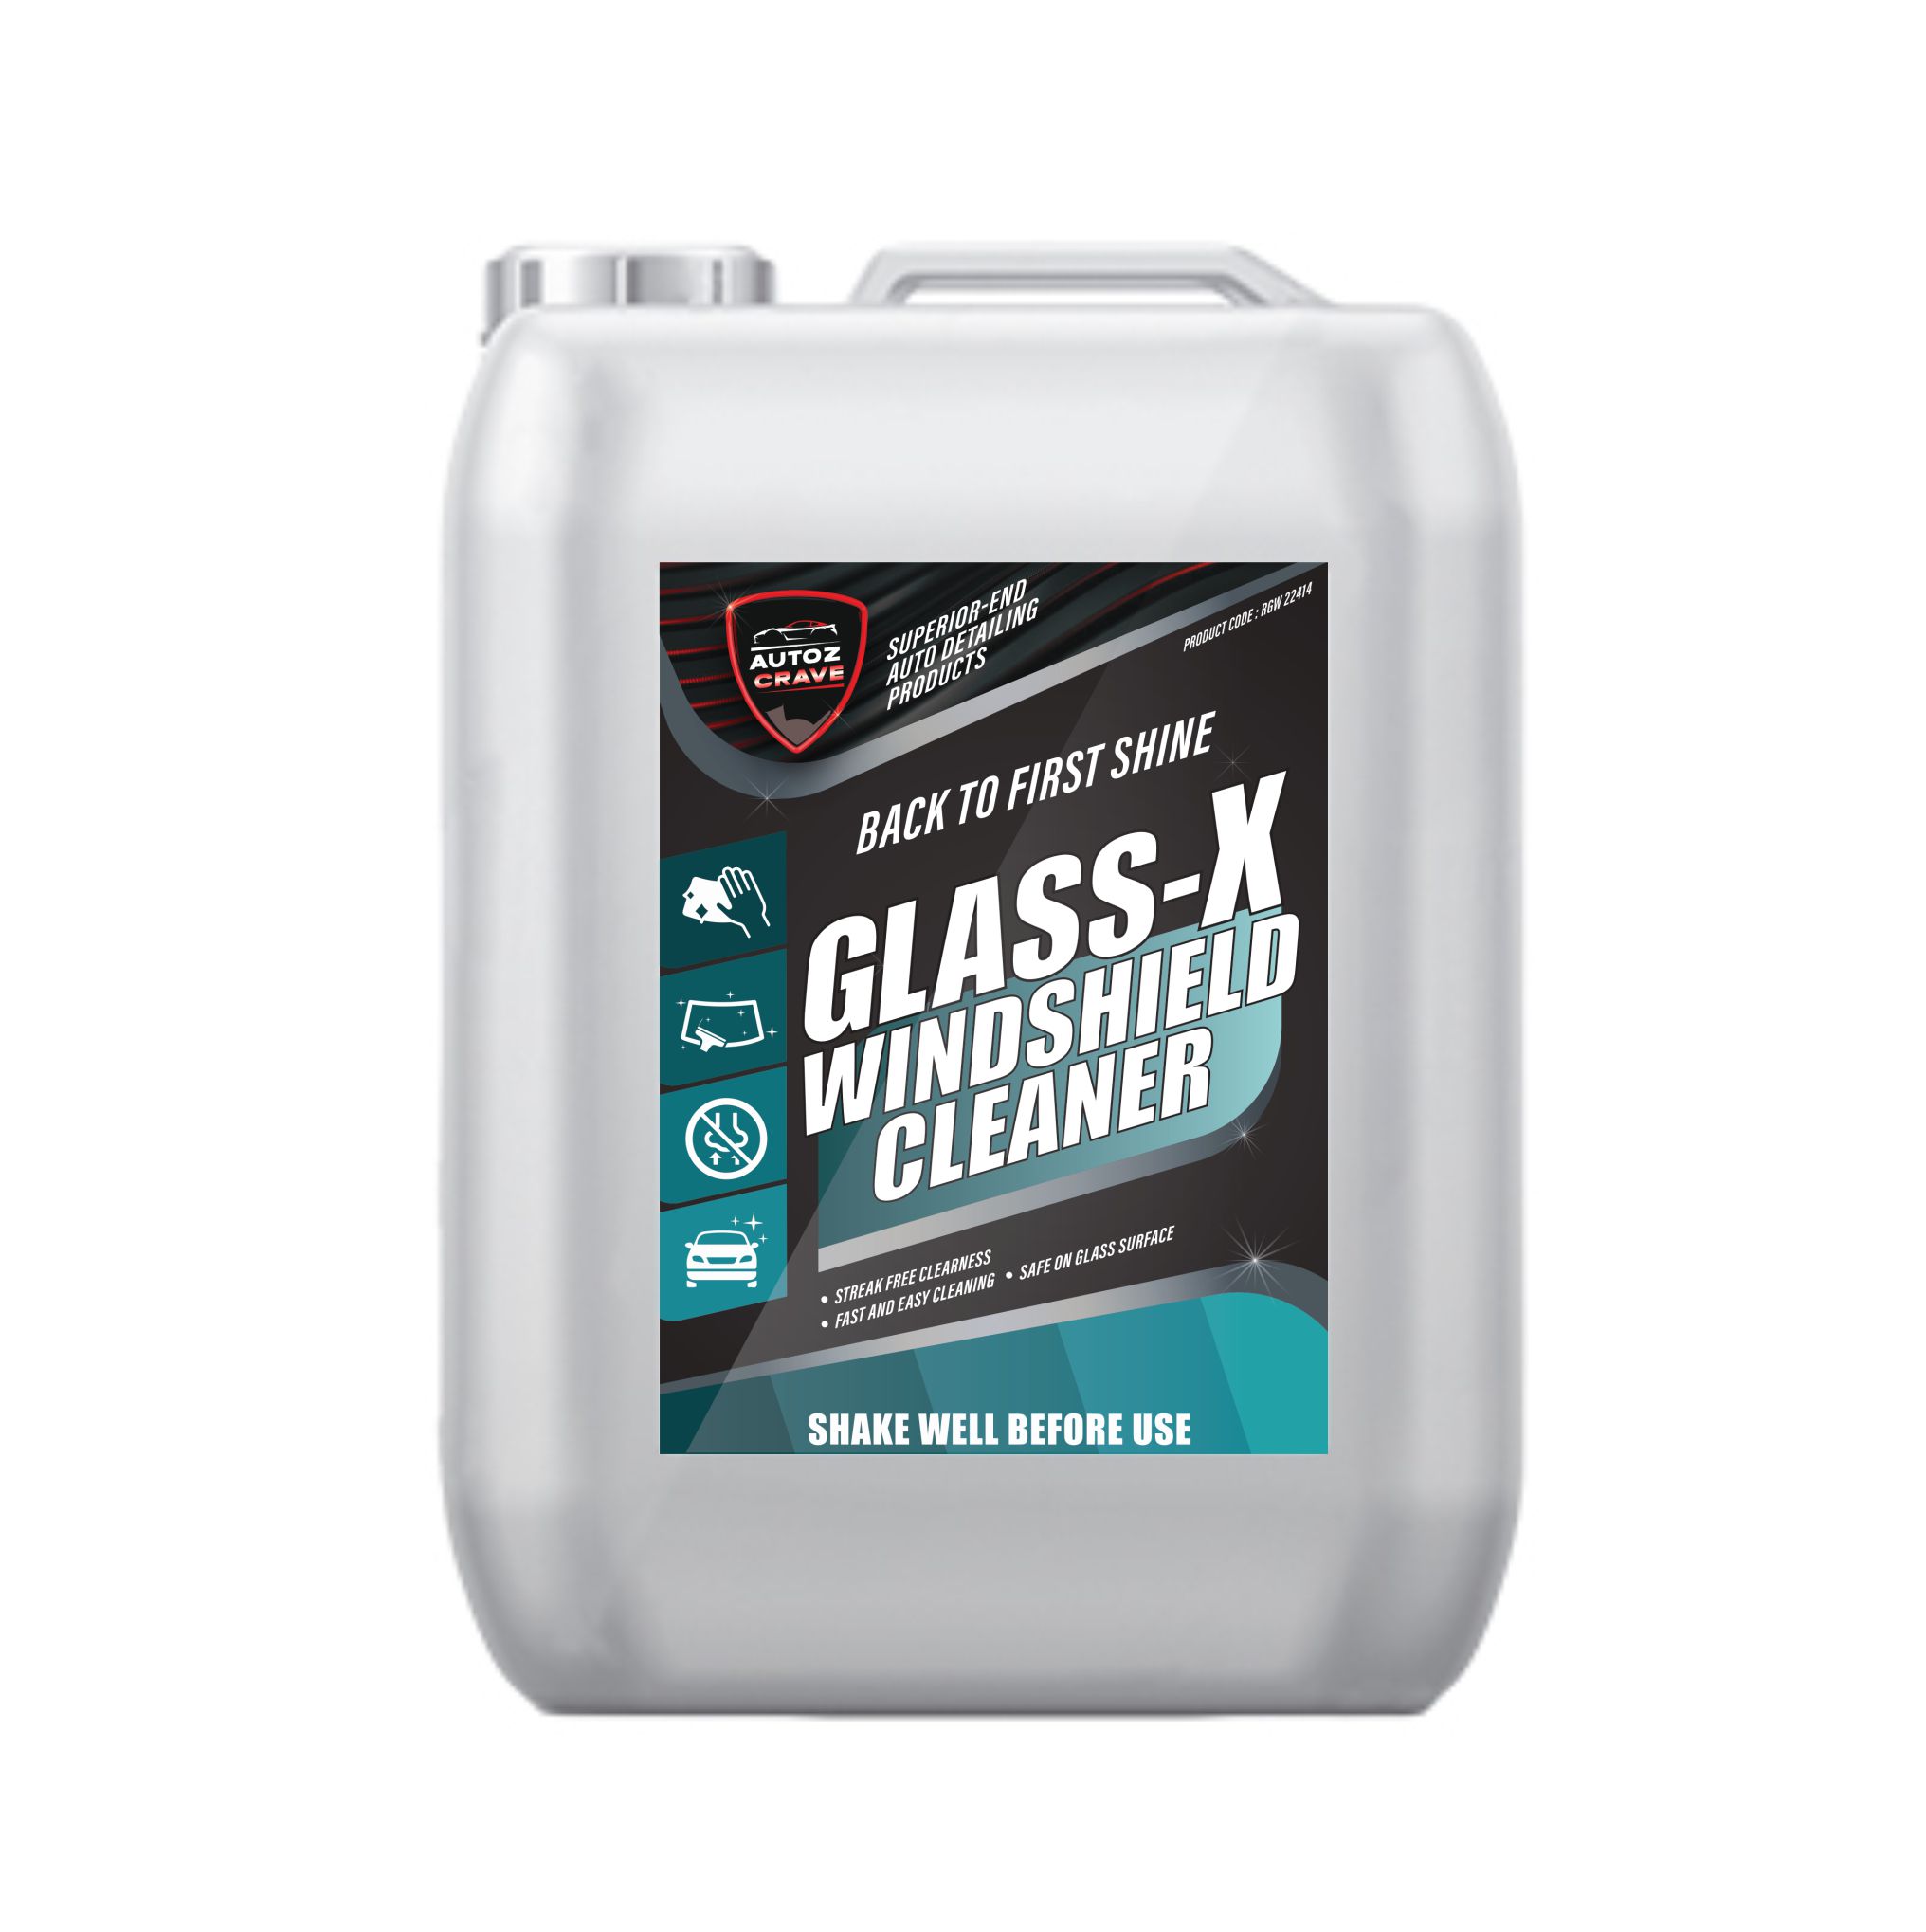 GLASS-X (WINDSHIELD CLEANER) FOR WINDSHIELD CLEANING 